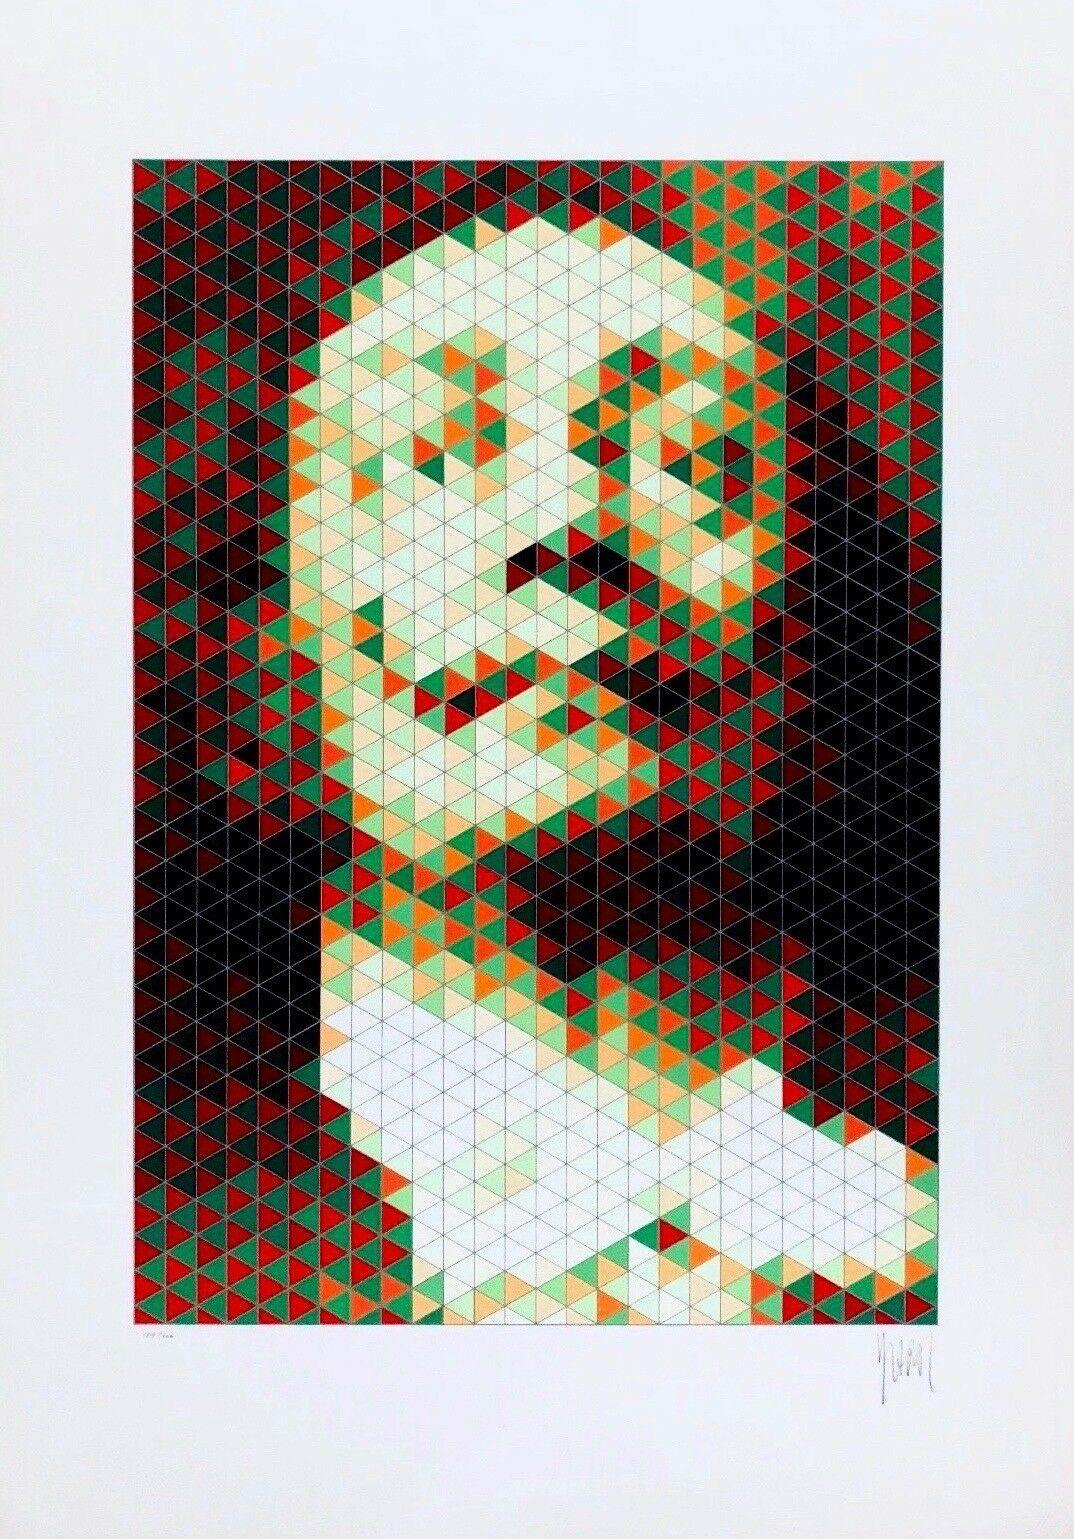 Faces of Dali #4 - Print by Yvaral (Jean-Pierre Vasarely)